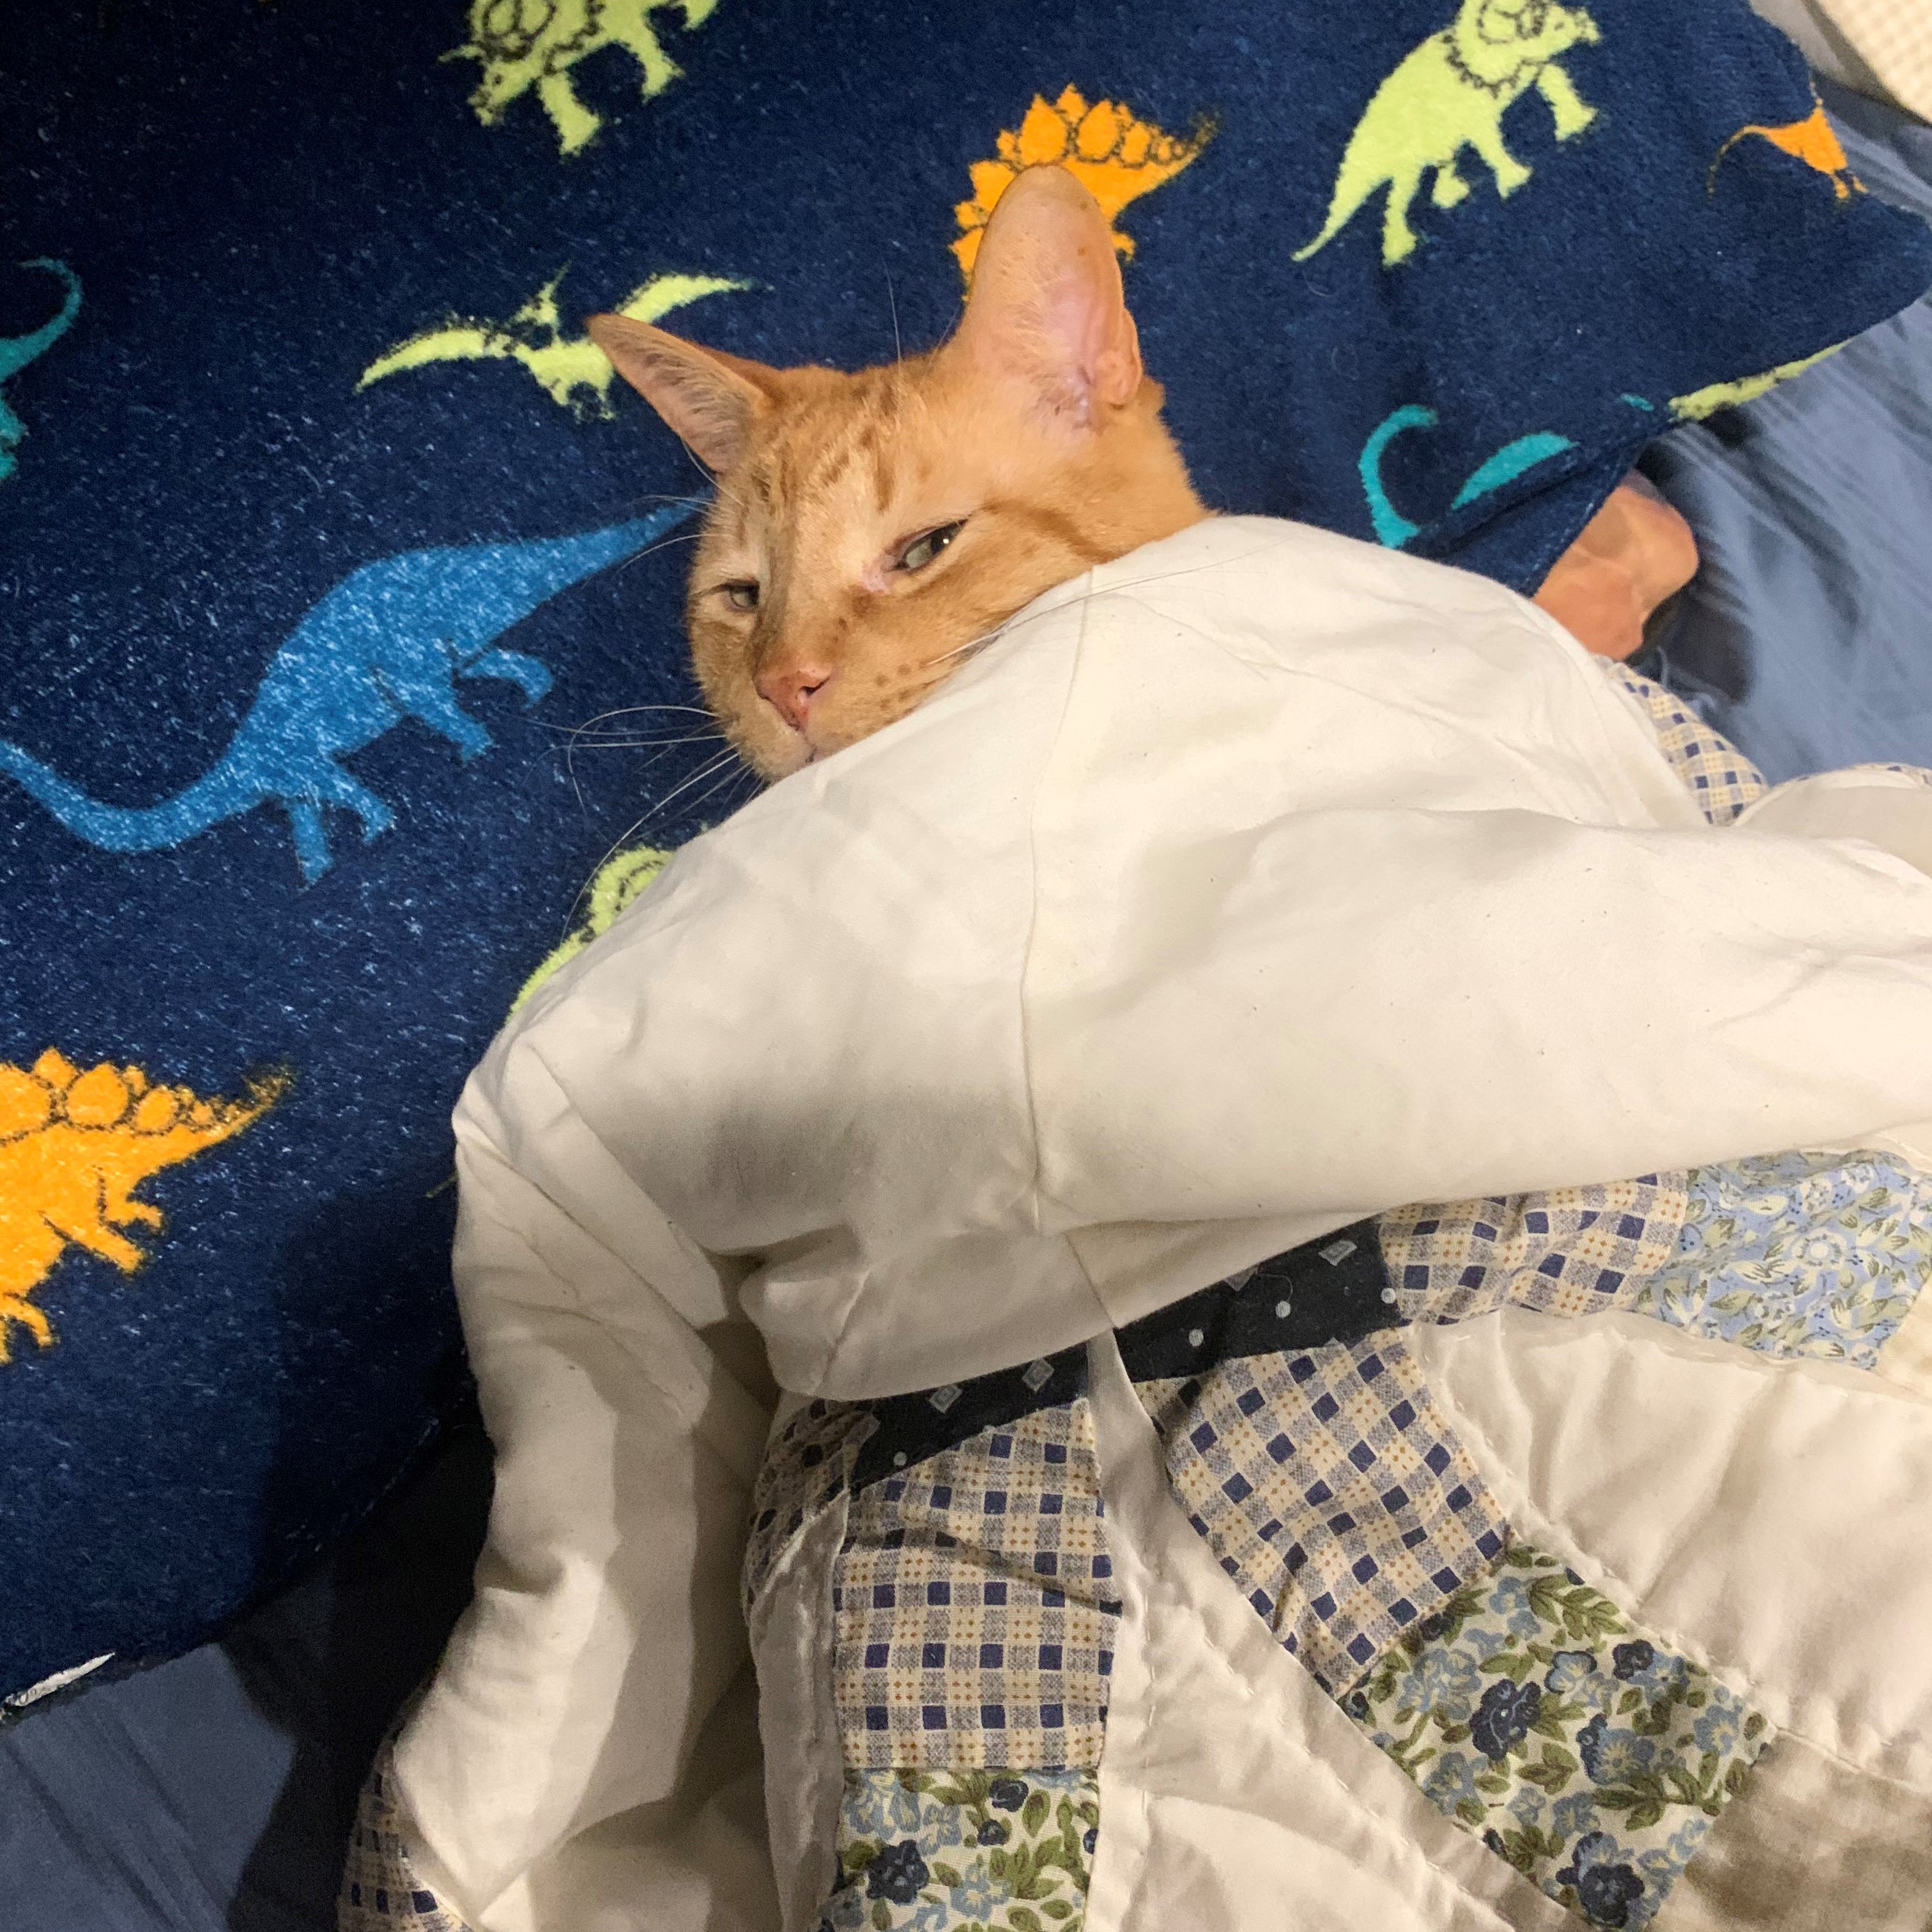 a close-up picture of stanley. he is tucked into bed with a large quilt and is laying his head on a navy blue pillow patterned with colorful dinosaurs. he is looking sleepily up at the camera